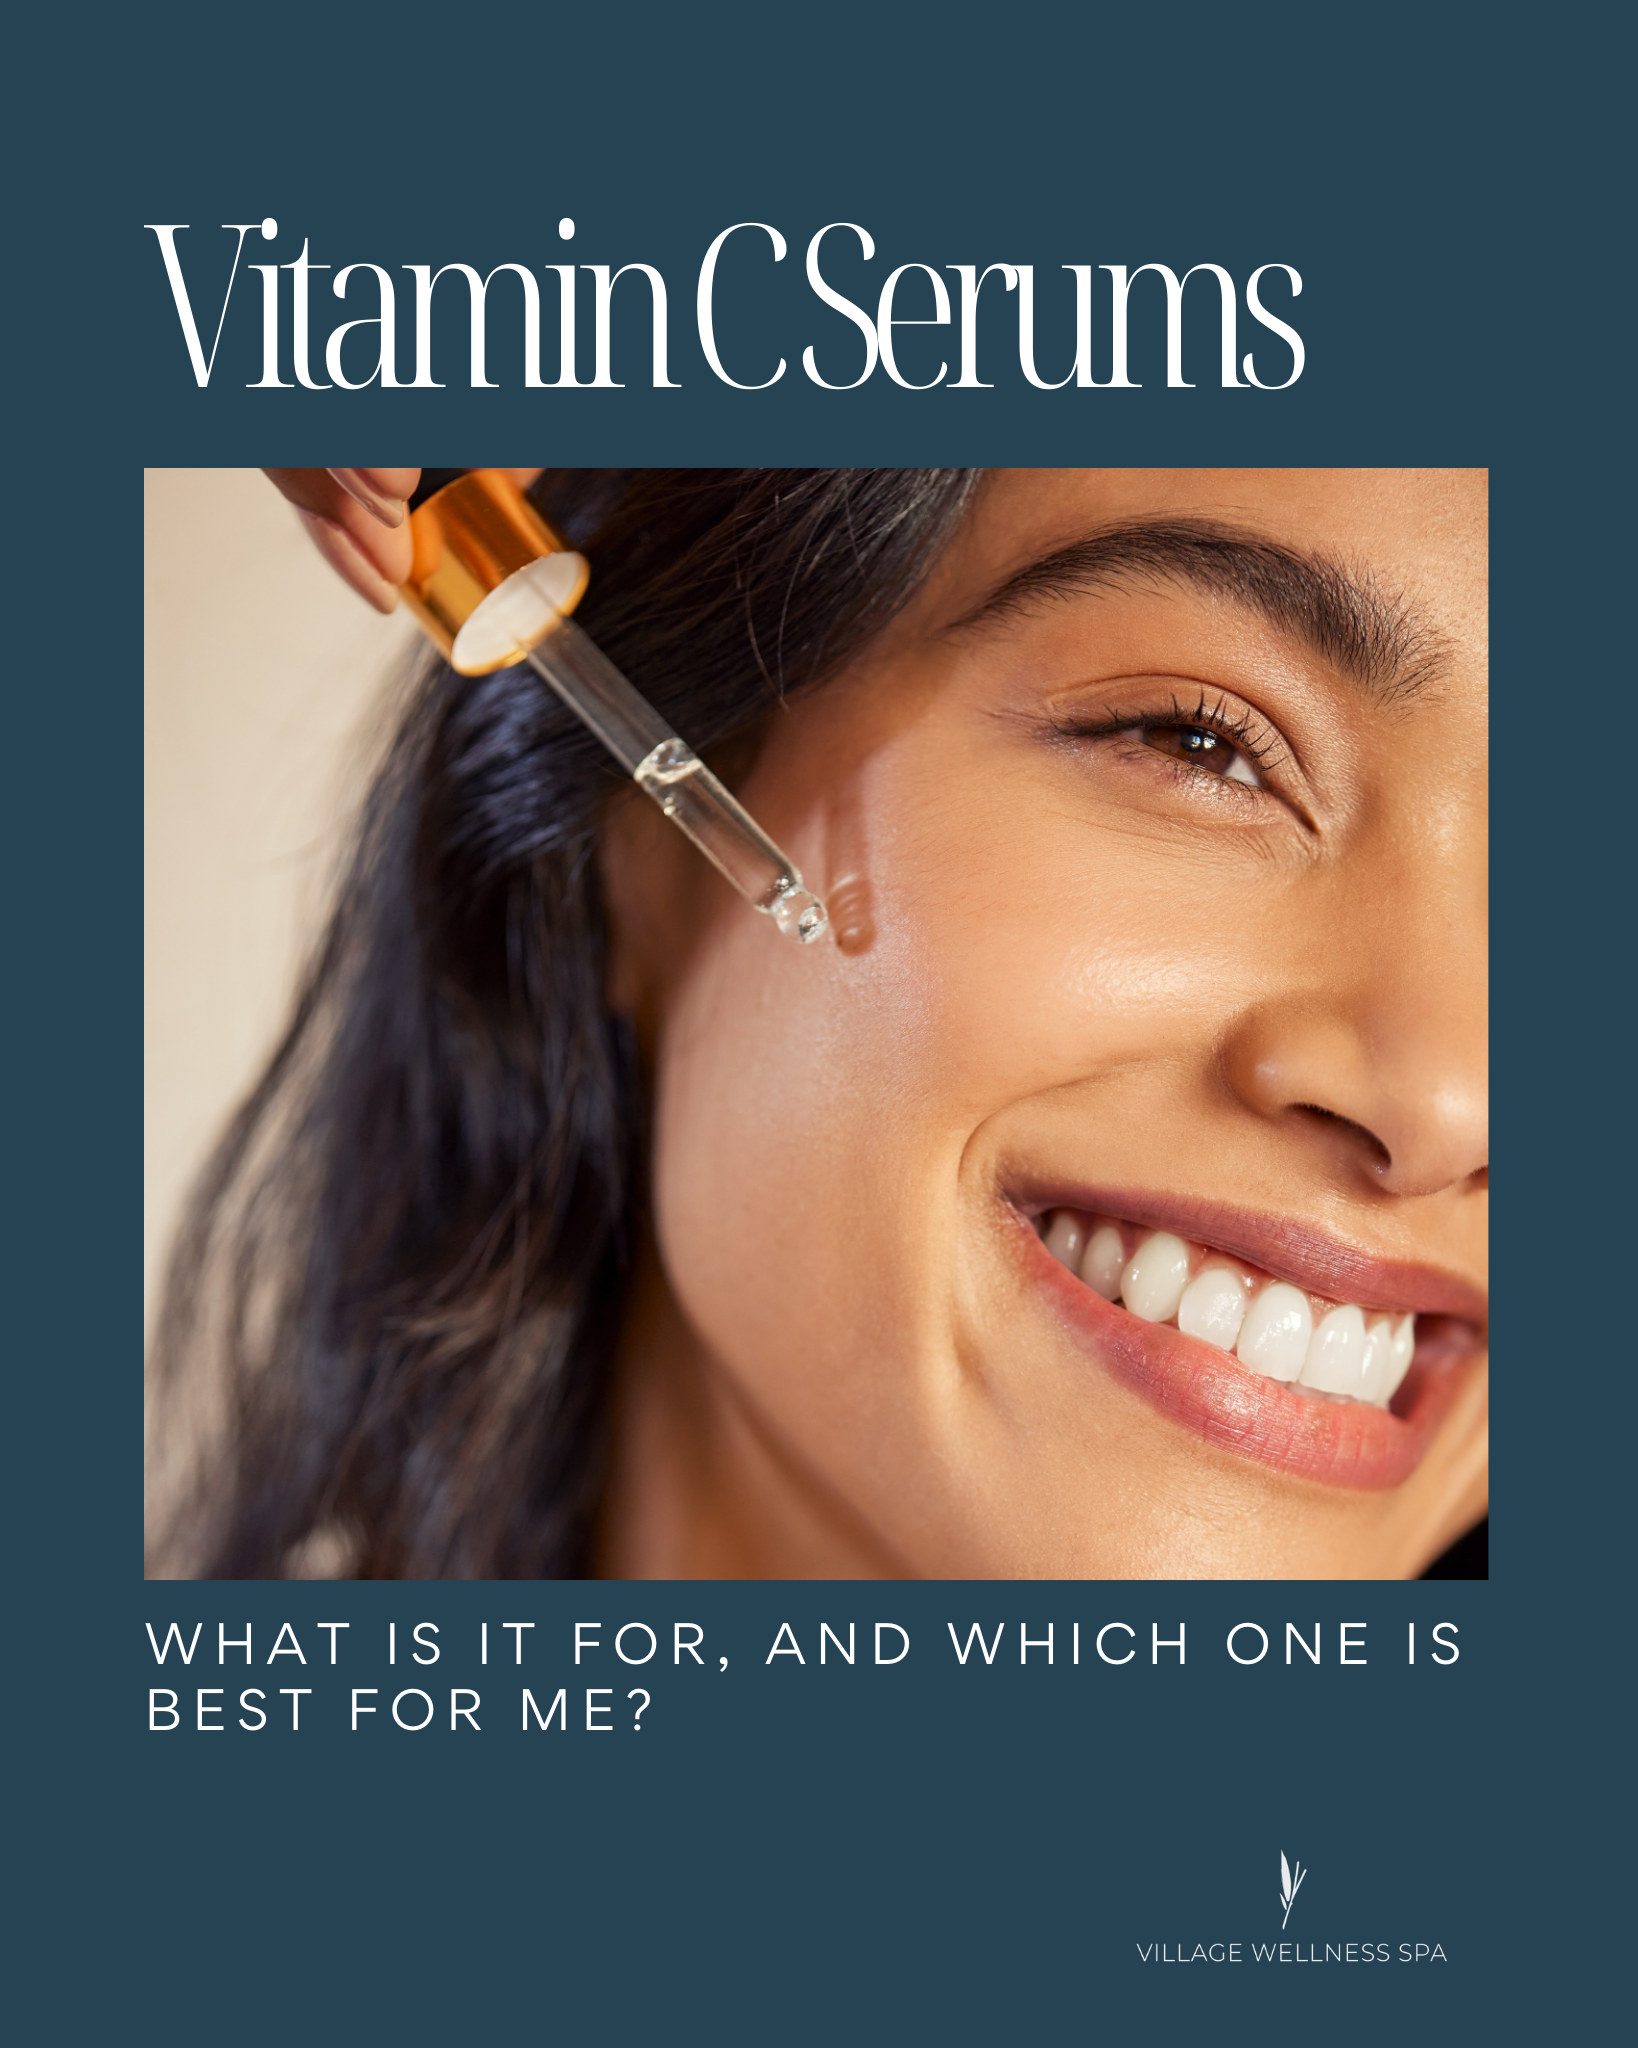 Vitamin C Serums - What is it for, and Which one is best for me?